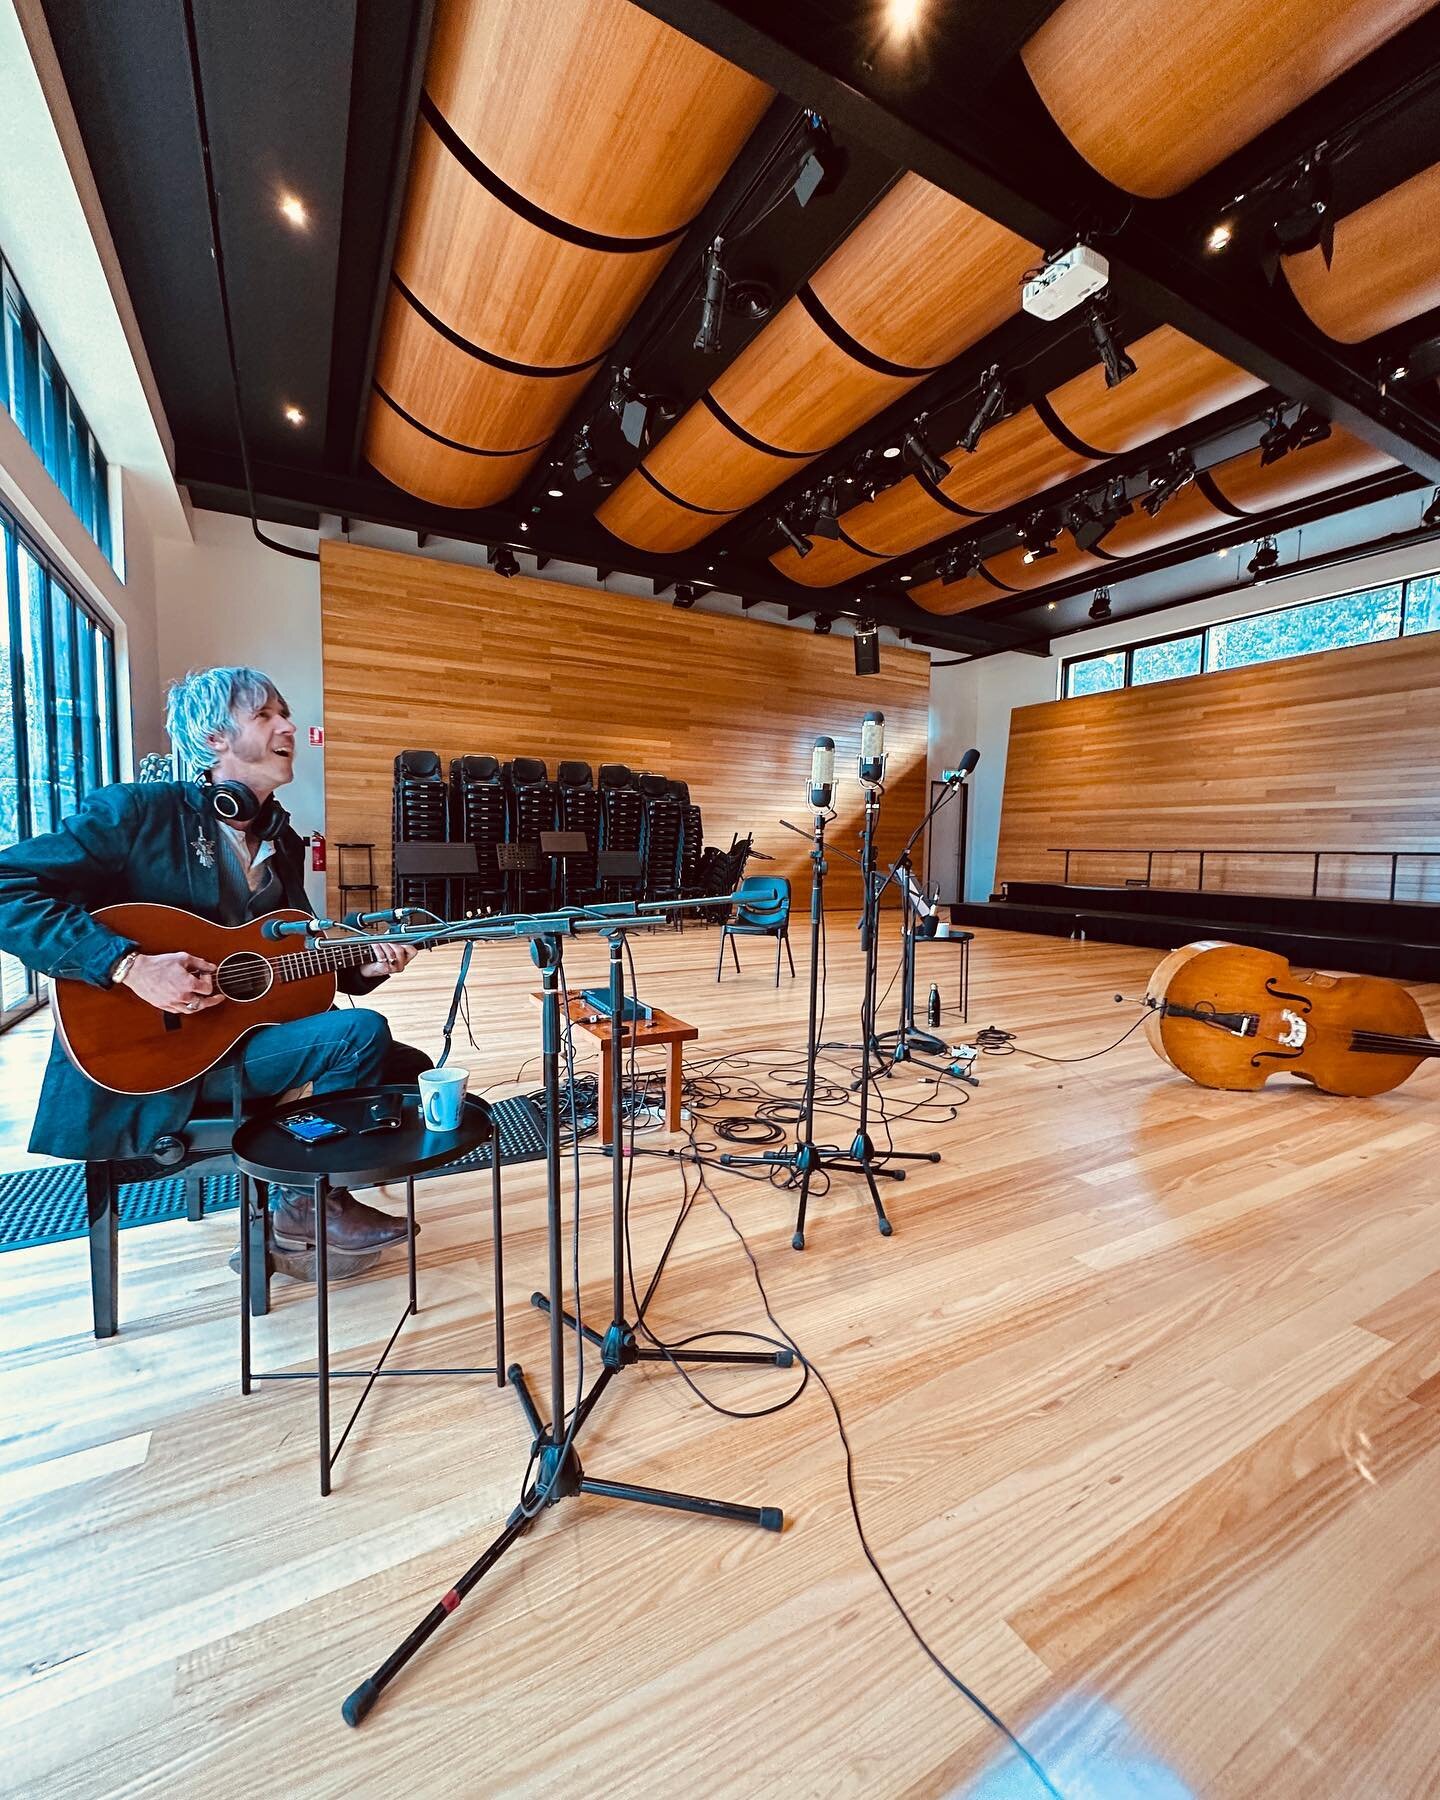 Dear friends, please join my band and I on Sunday April 21 for a special live recording in this very special room out among the spotted gums at beautiful Barraga Bay, NSW. Head to @fourwindsau for tickets. xo